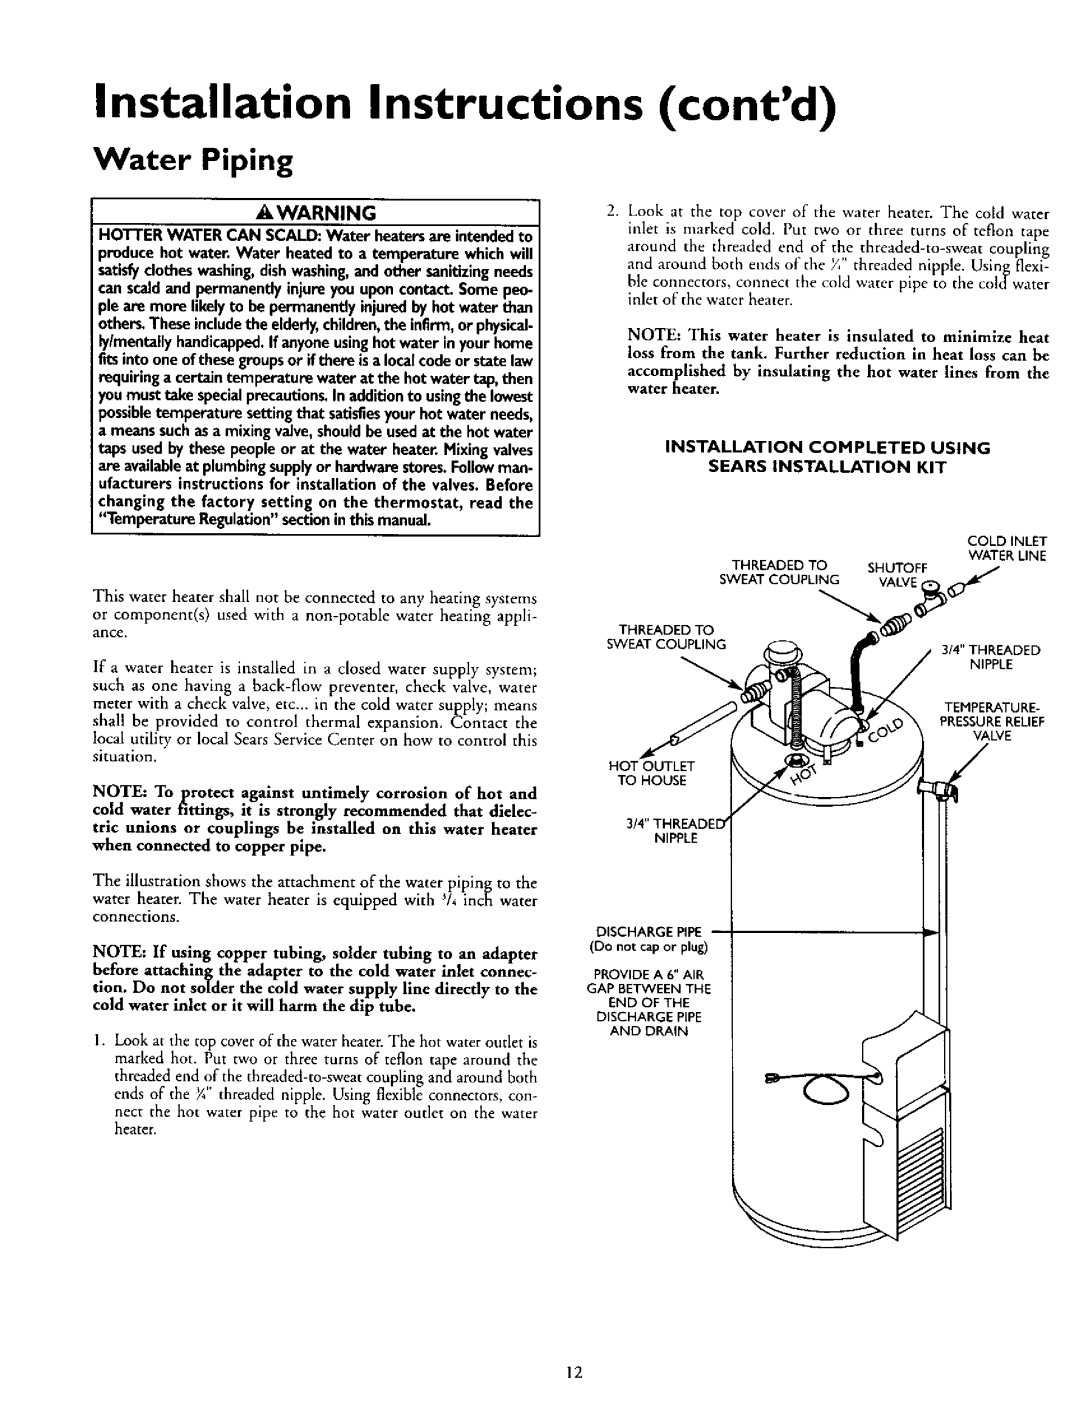 Kenmore 153.335962 Water Piping, Installation Instructions contd, Installation Completed Using, Sears Installation Kit 